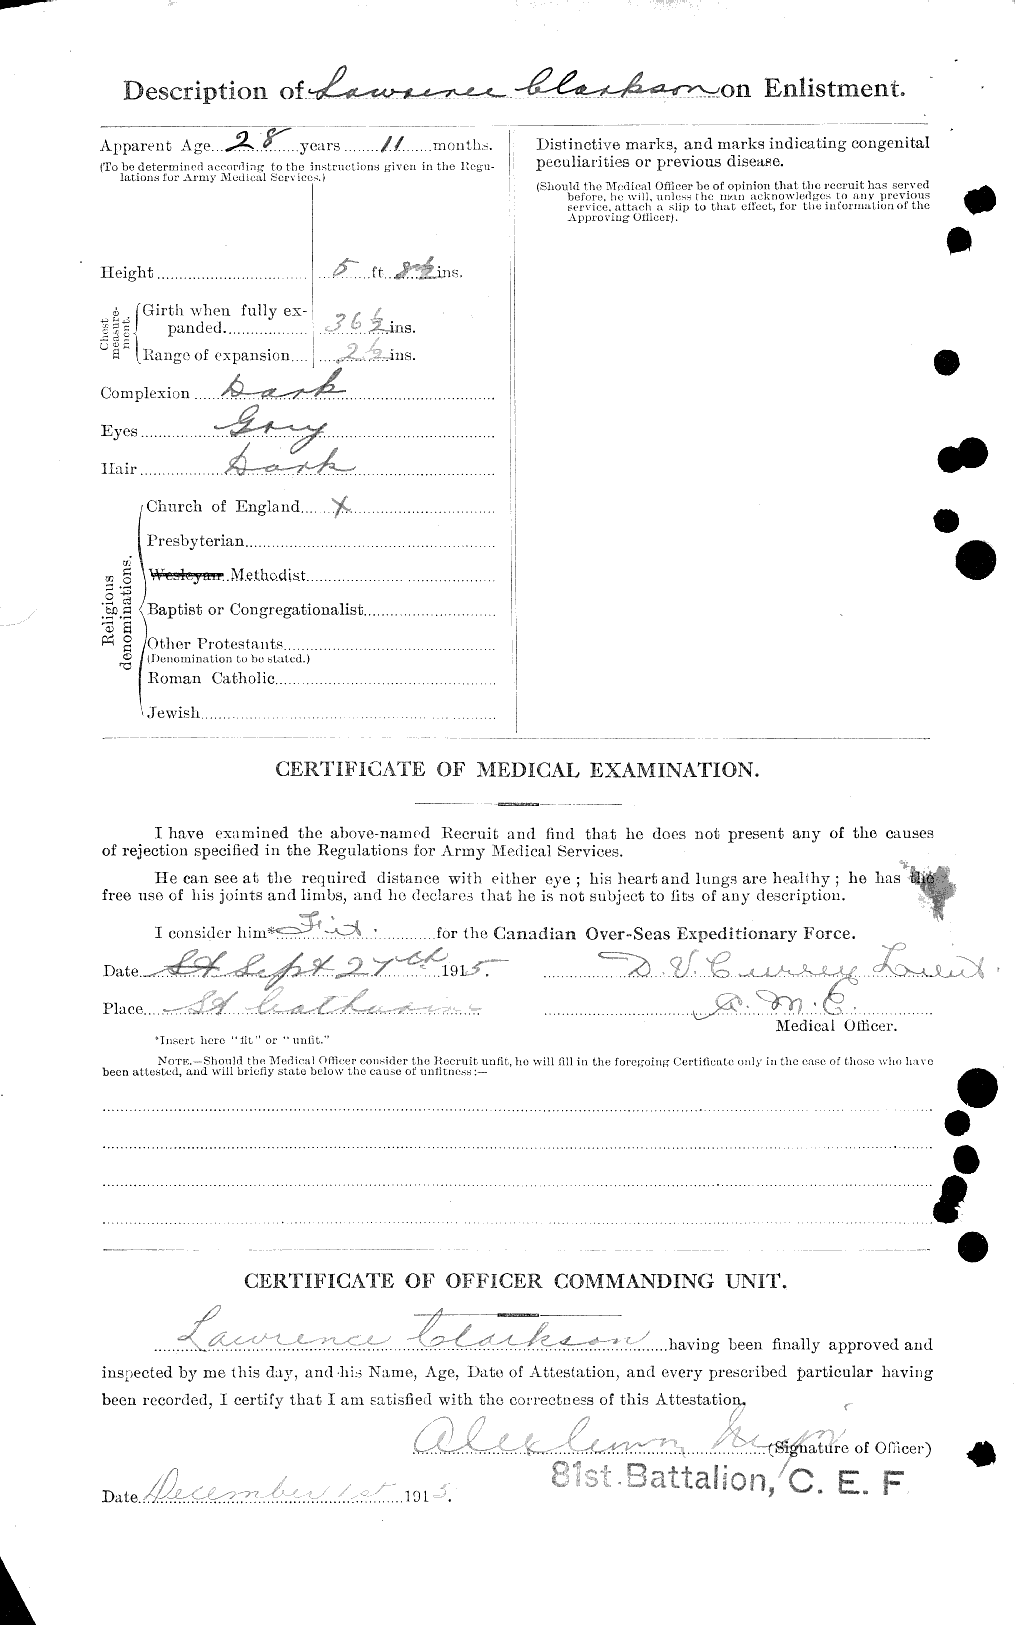 Personnel Records of the First World War - CEF 021460b